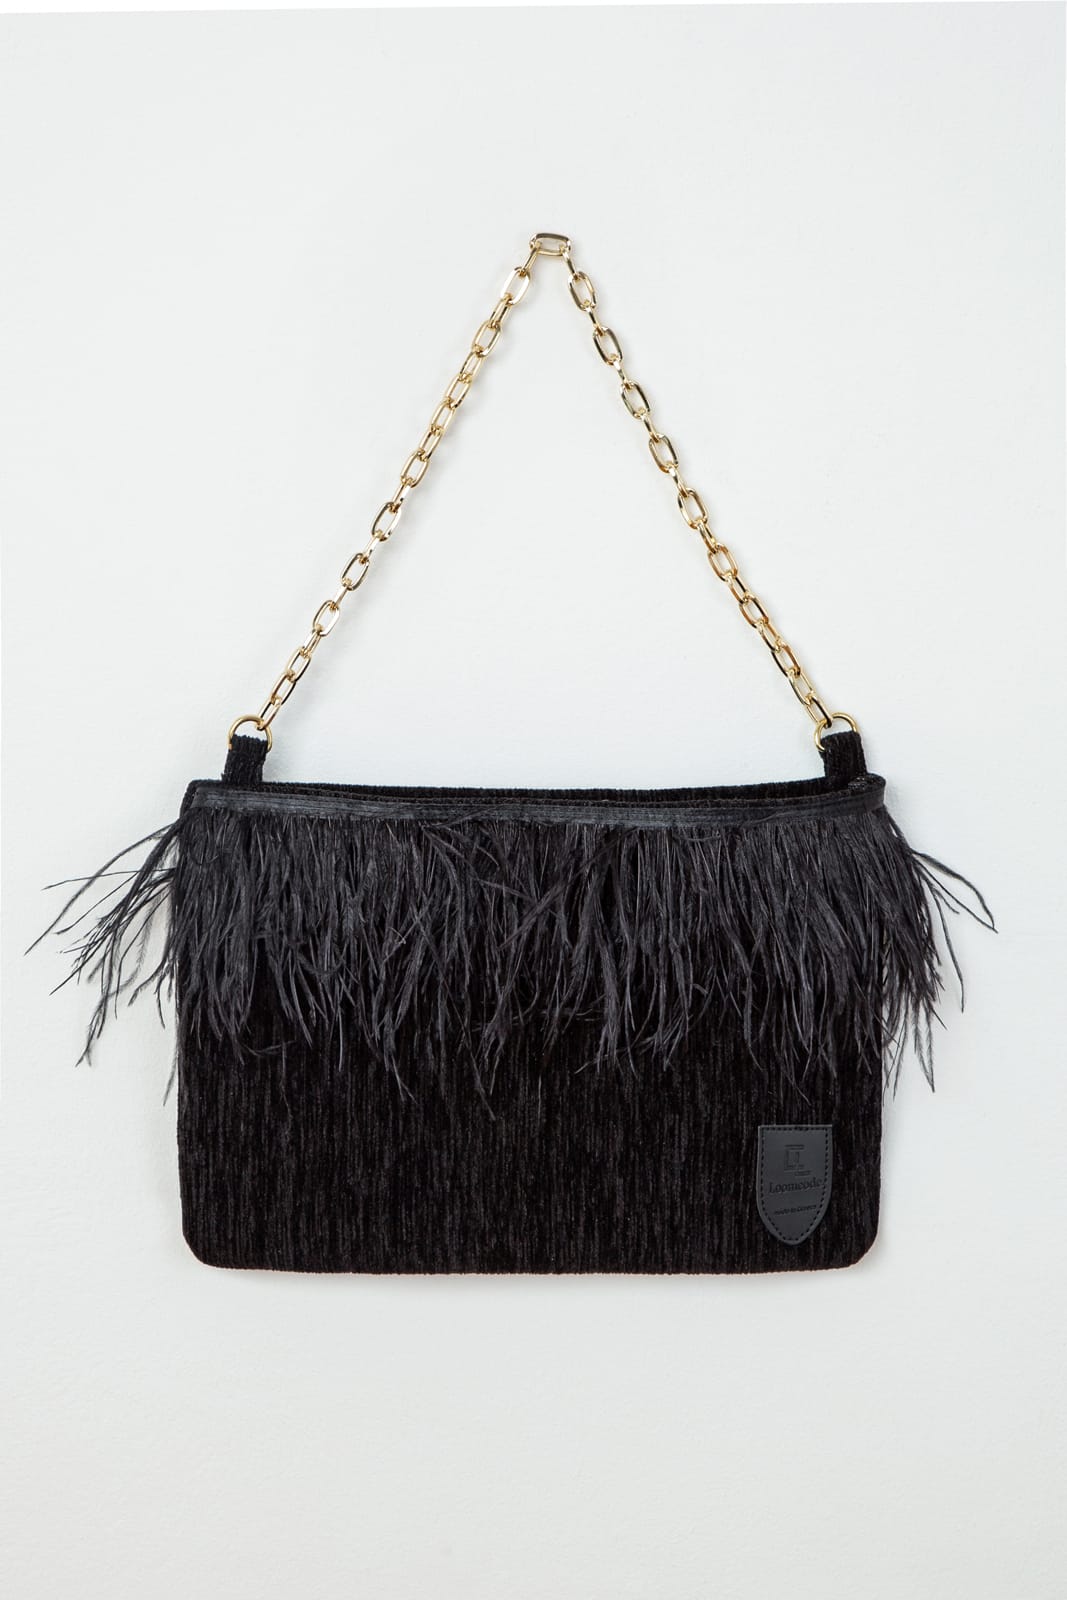 CLUTCH FEATHER CHAIN